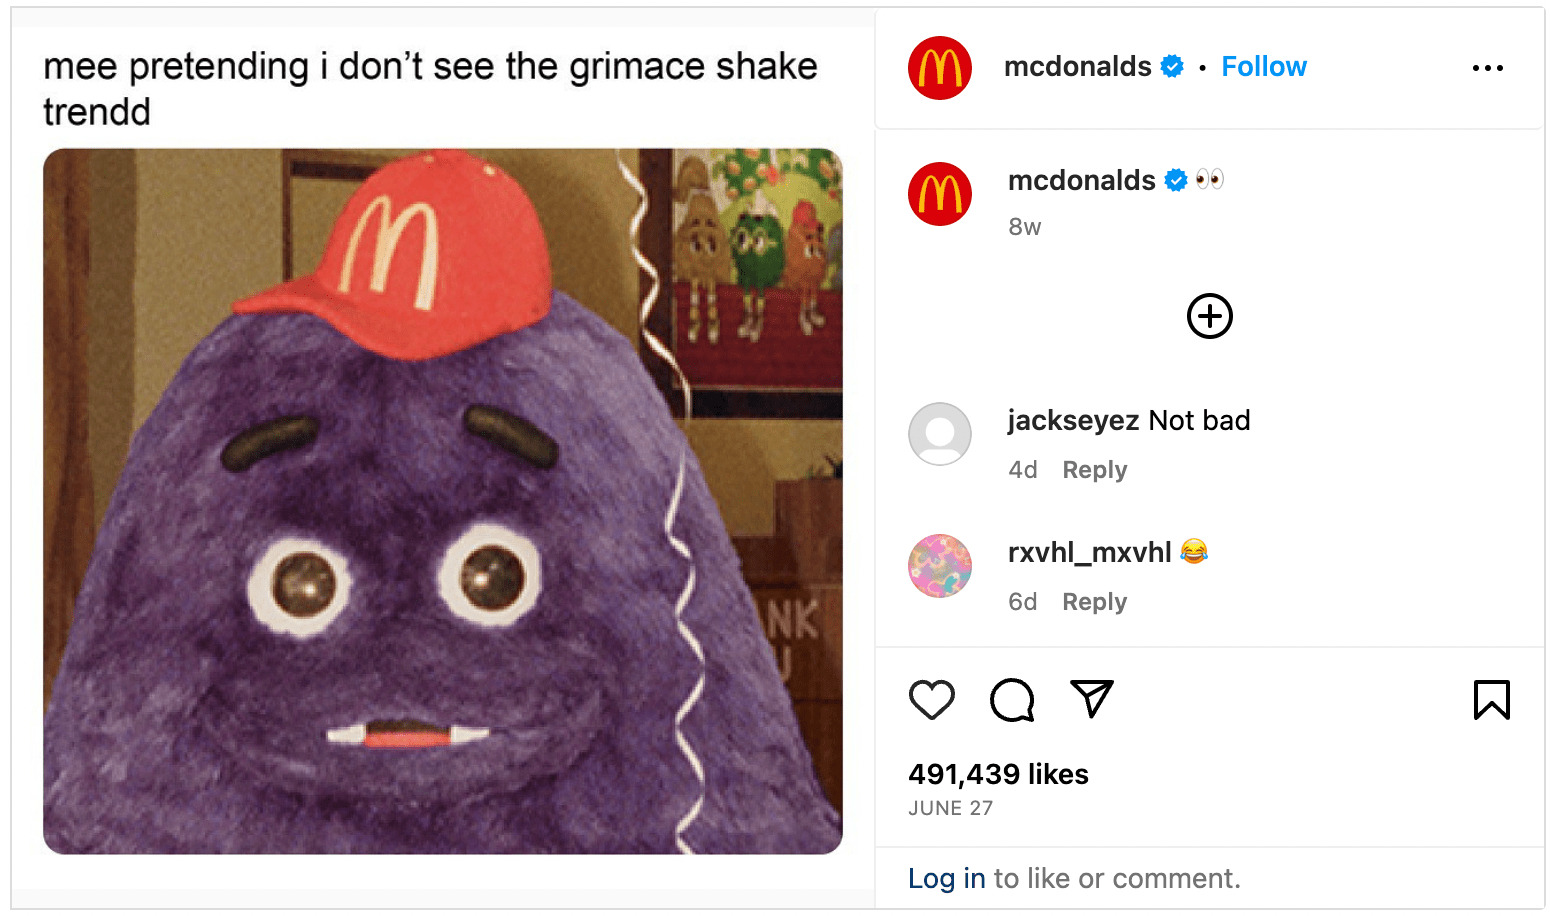 McDonald's on social media addressing brand negativity related to one of their characters.